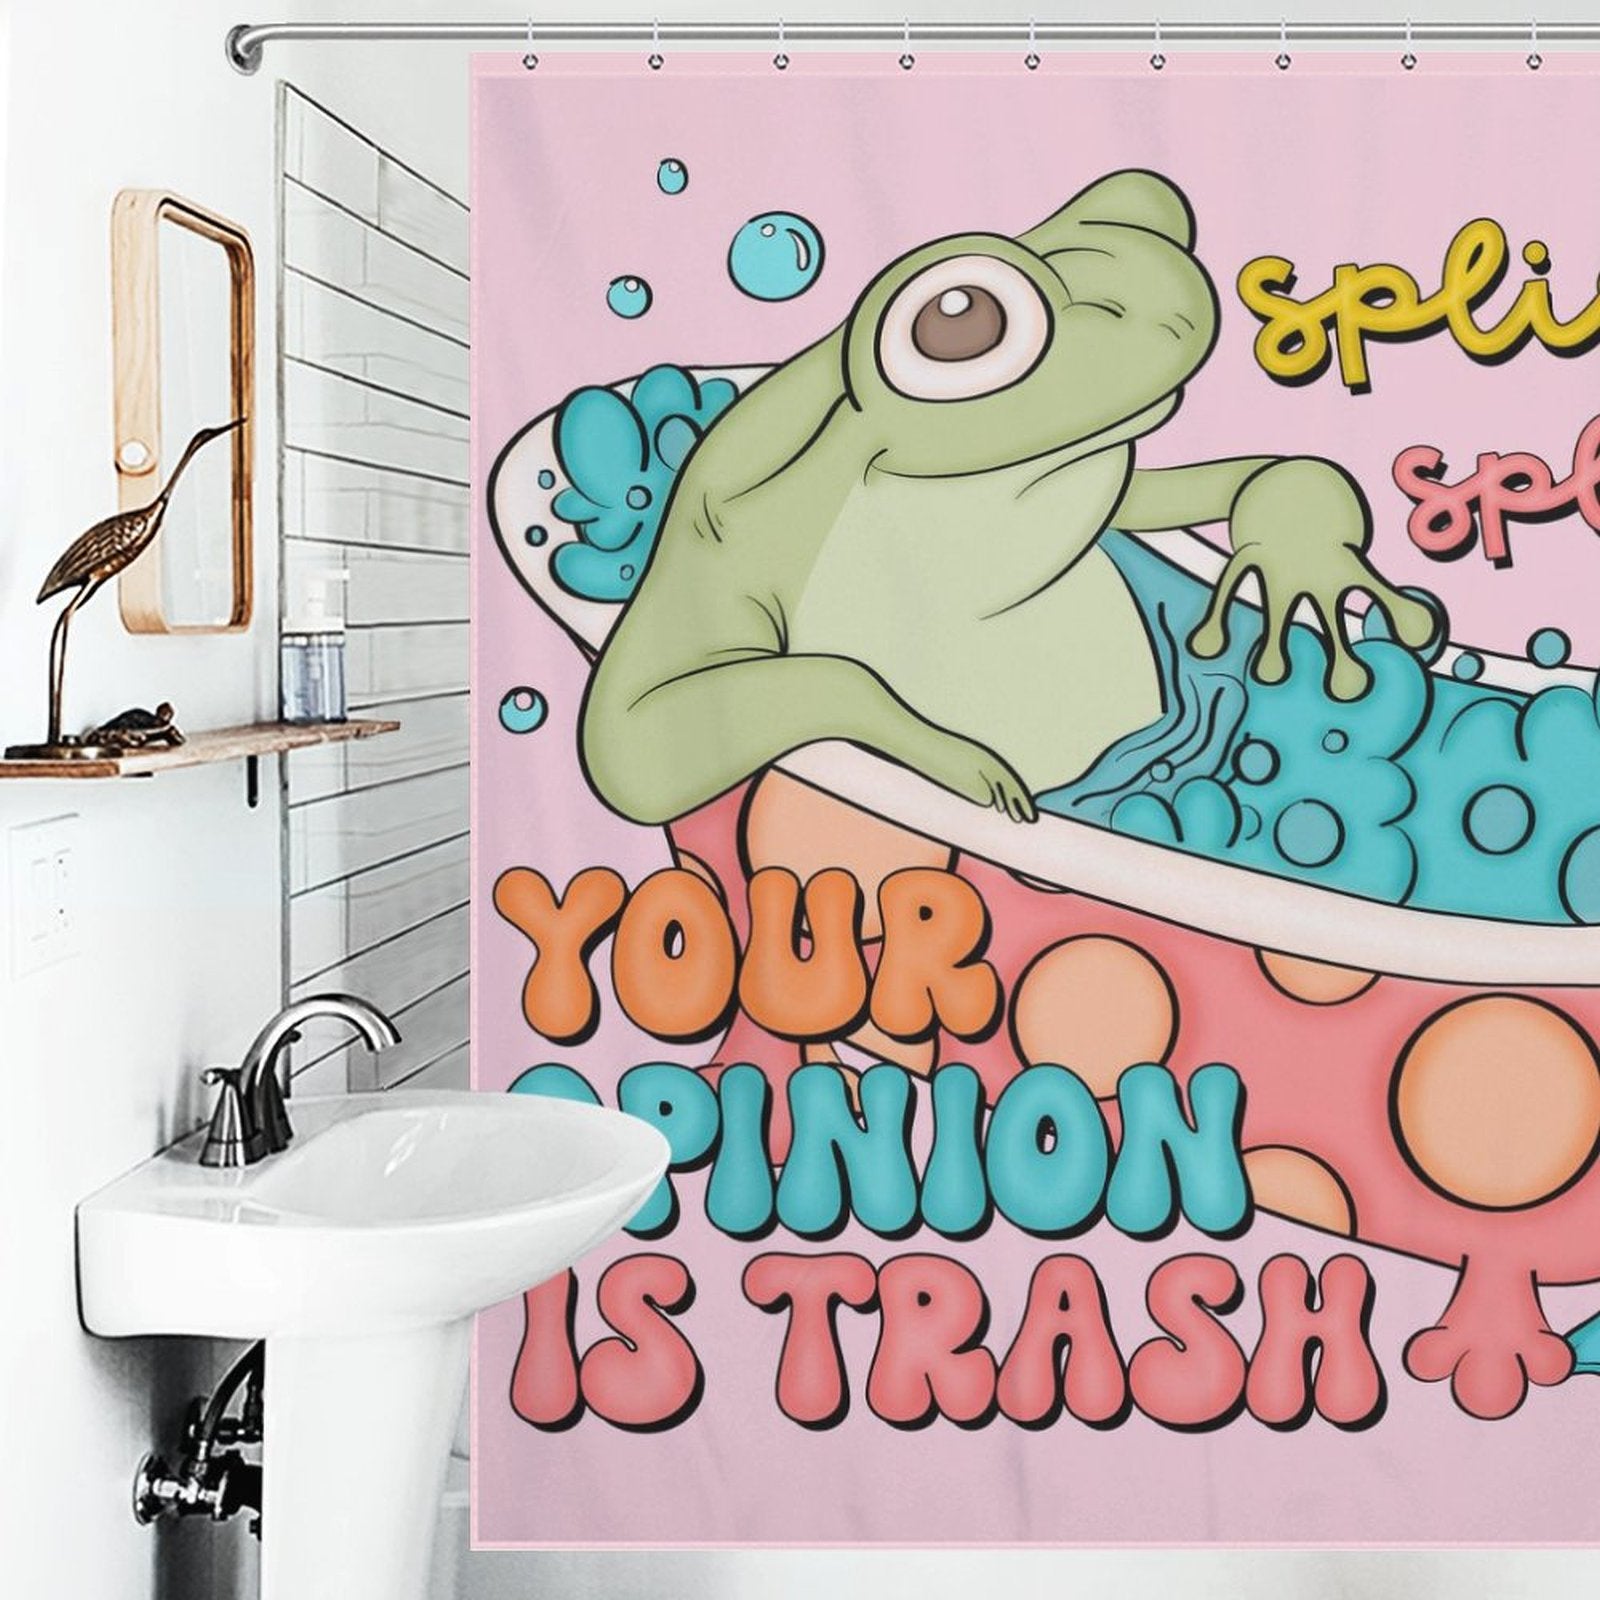 The Funny Humor Sarcastic Froggy Shower Curtain-Cottoncat by Cotton Cat features a cartoon frog in a bathtub and the text "Your opinion is trash" in colorful bubble letters.